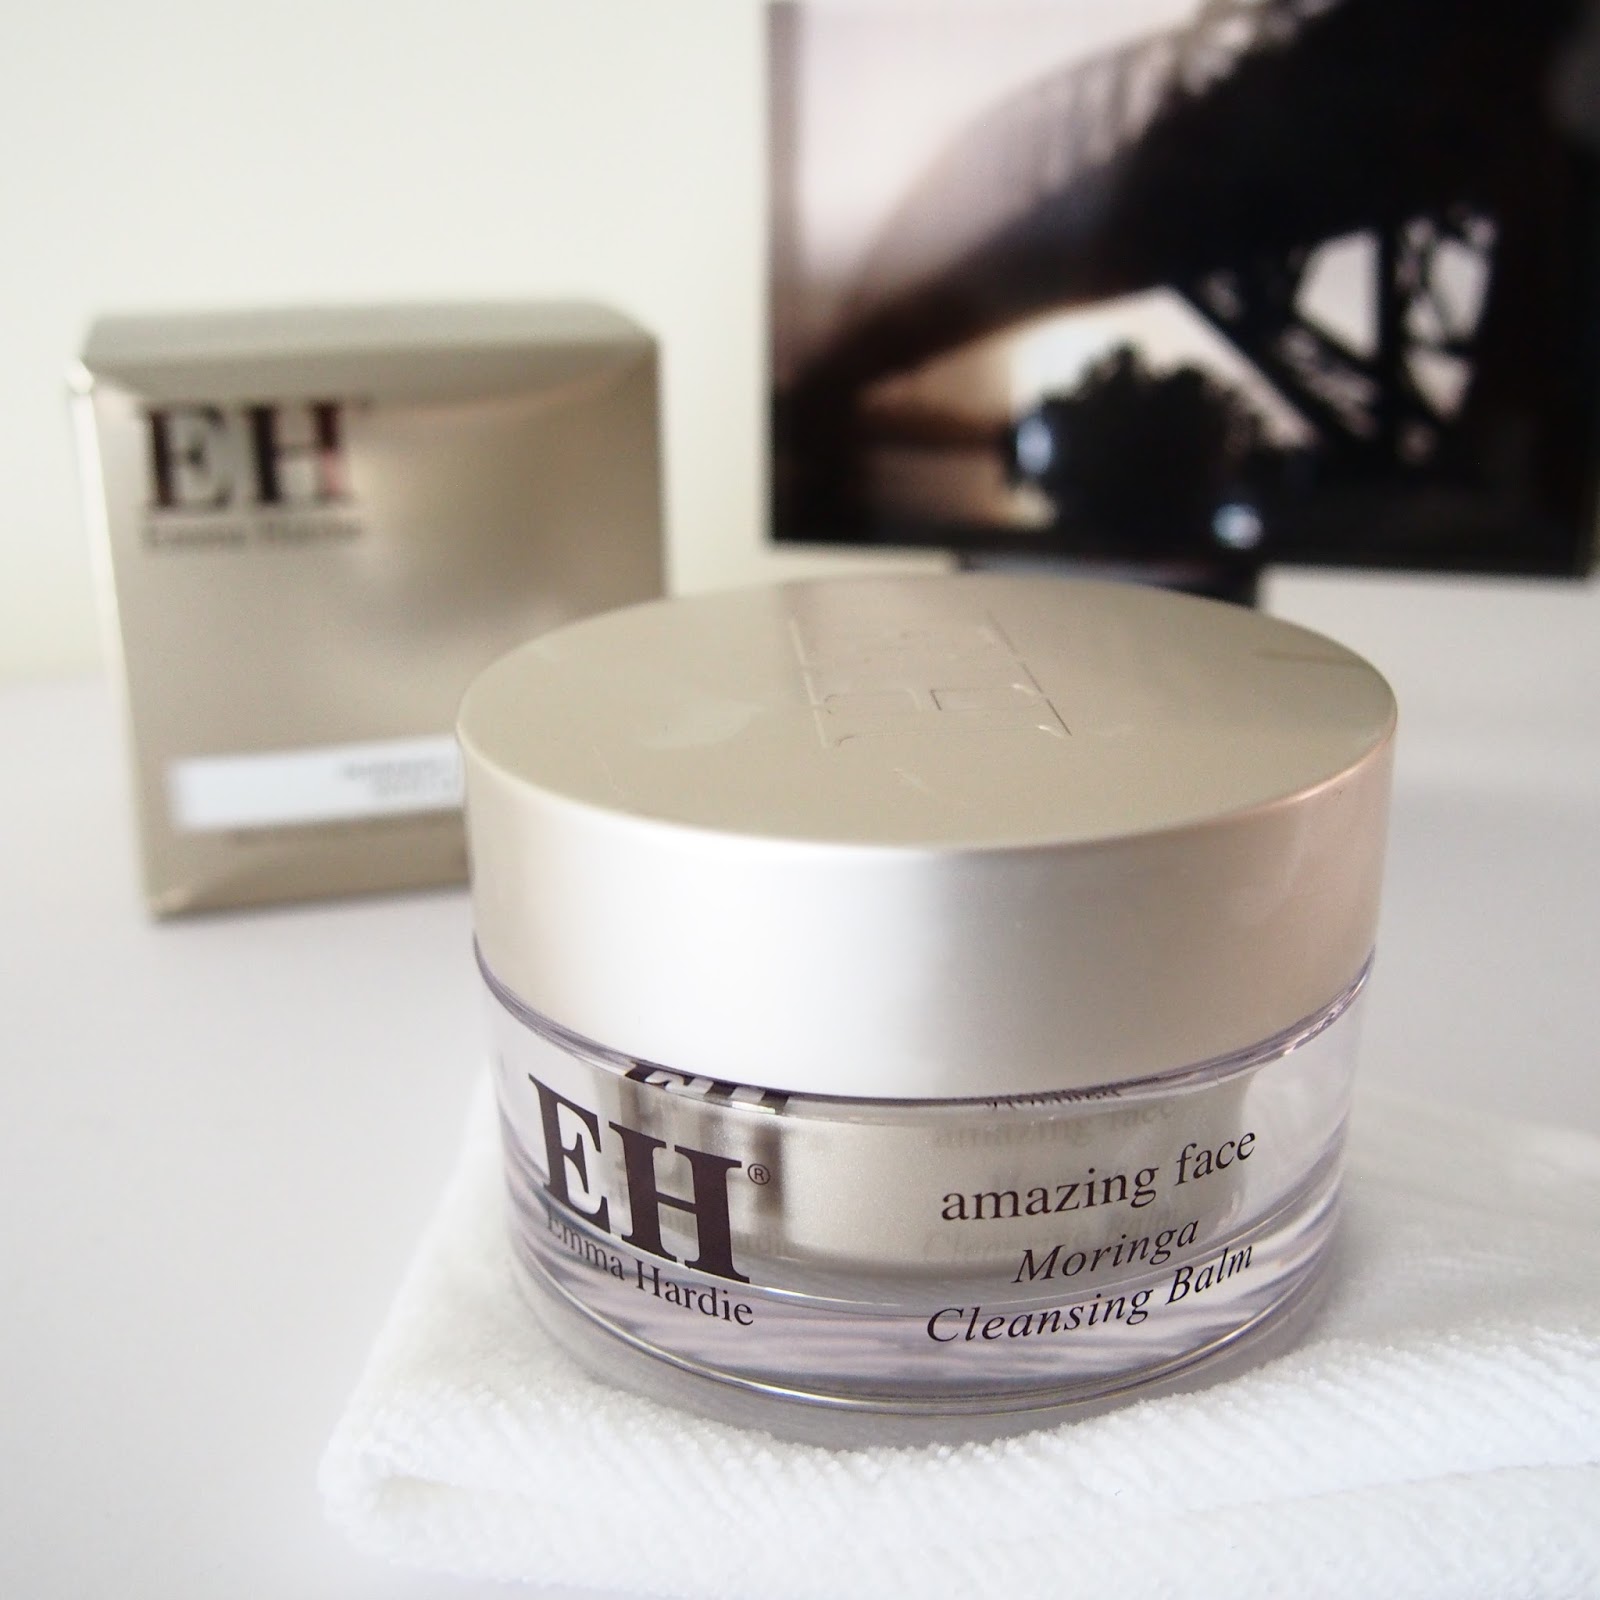 emma hardie cleansing balm review